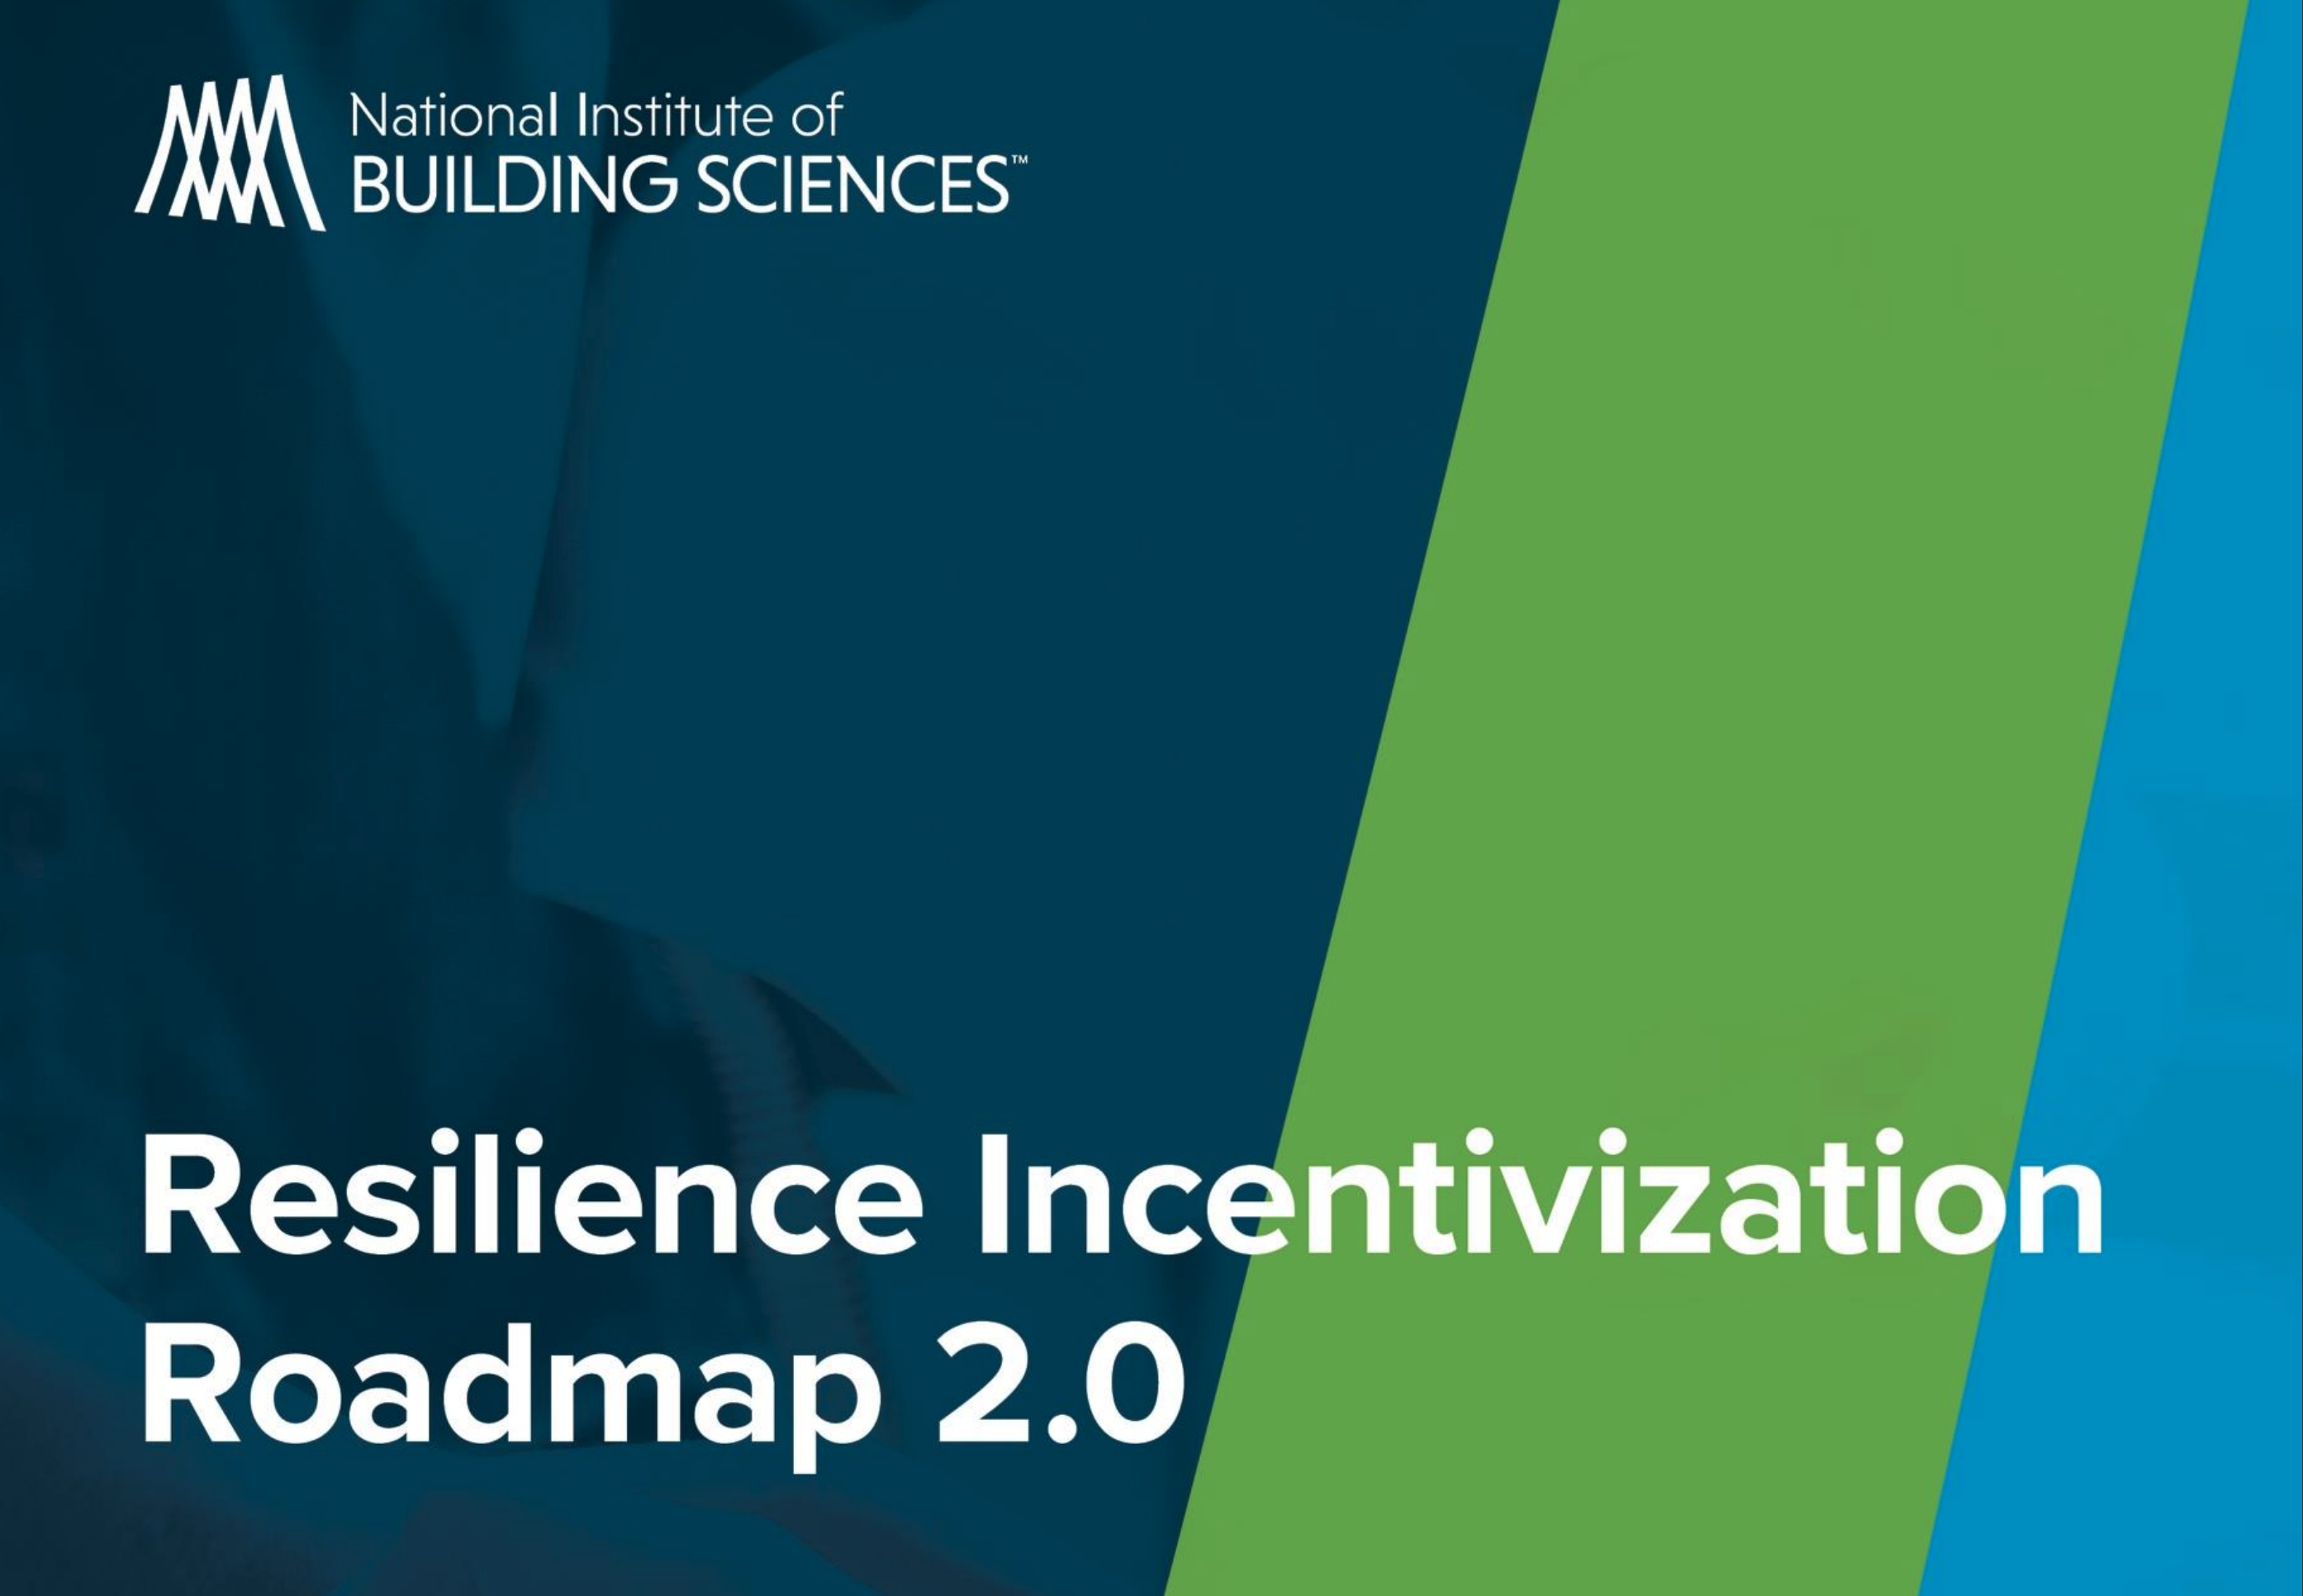 National Institute of Building Sciences, Fannie Mae release roadmap for resilience